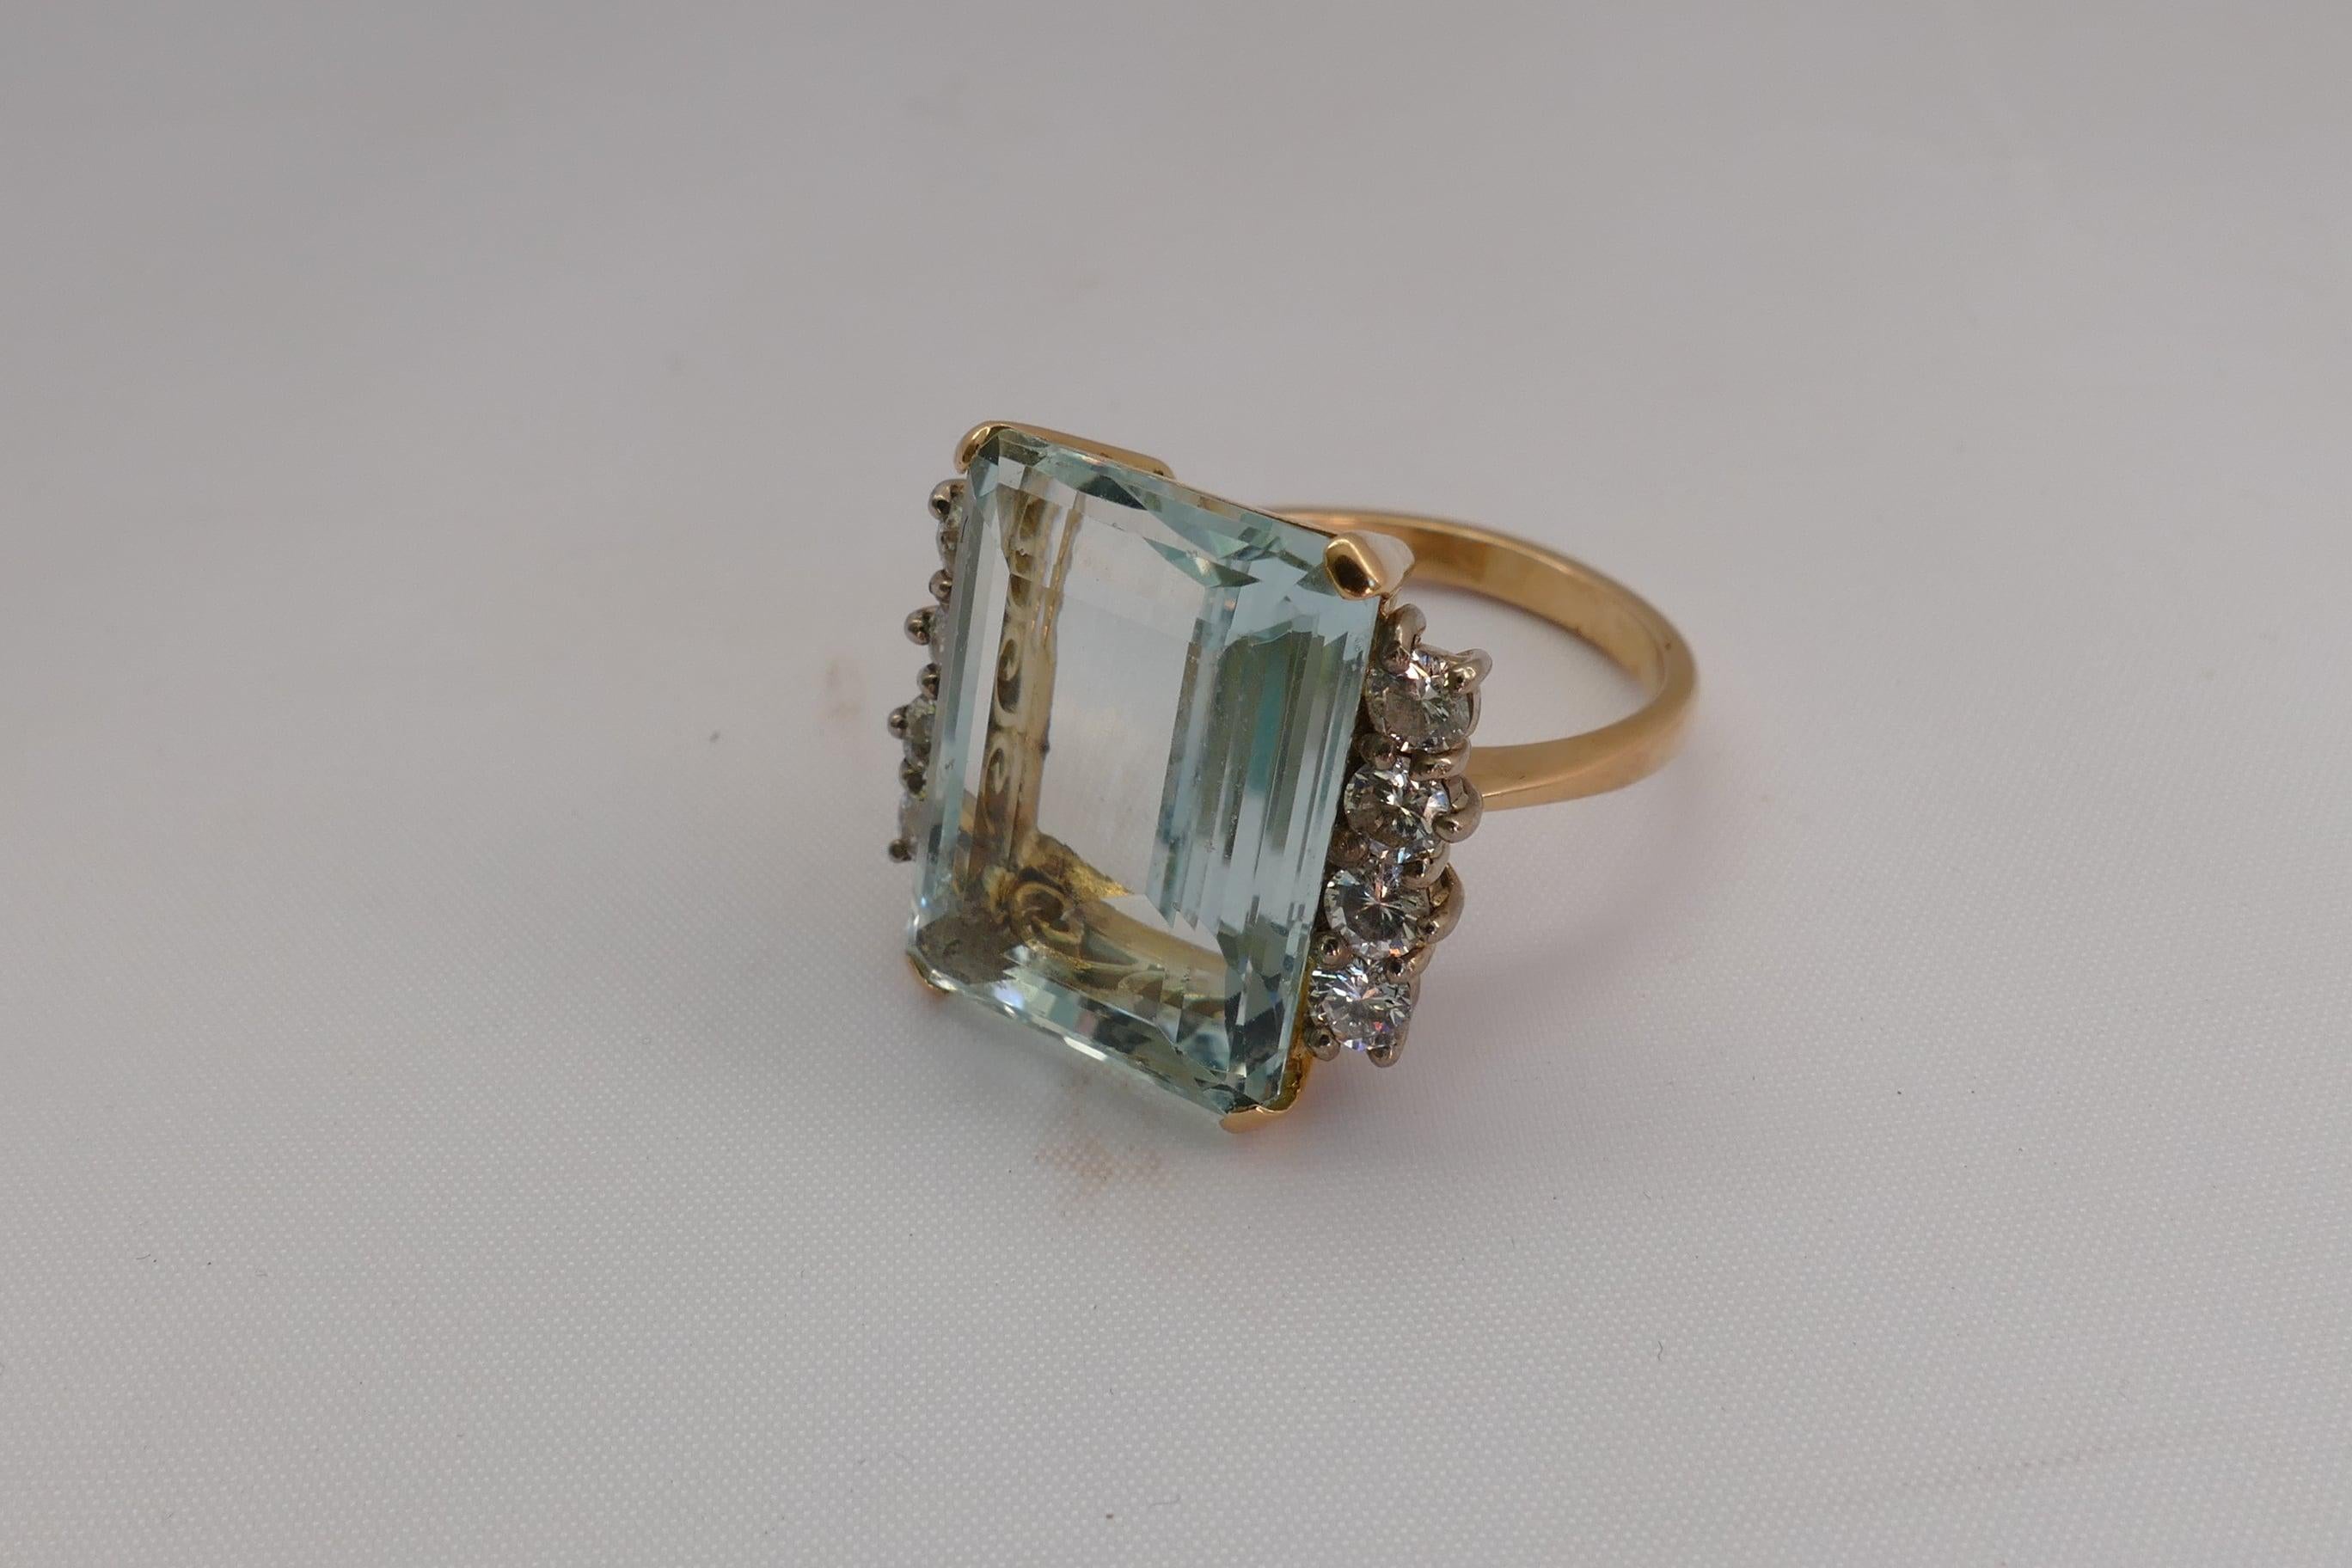 This Art Deco Style, but possibly genuine Art Deco Emerald Cut Aquamarine Stone is a large beautifully translucent sea blue/green, claw set, flanked by 8 Round Brilliant Cut Diamonds, Colour H/I and Clarity SI1-SI2.
The Band is polished, low half